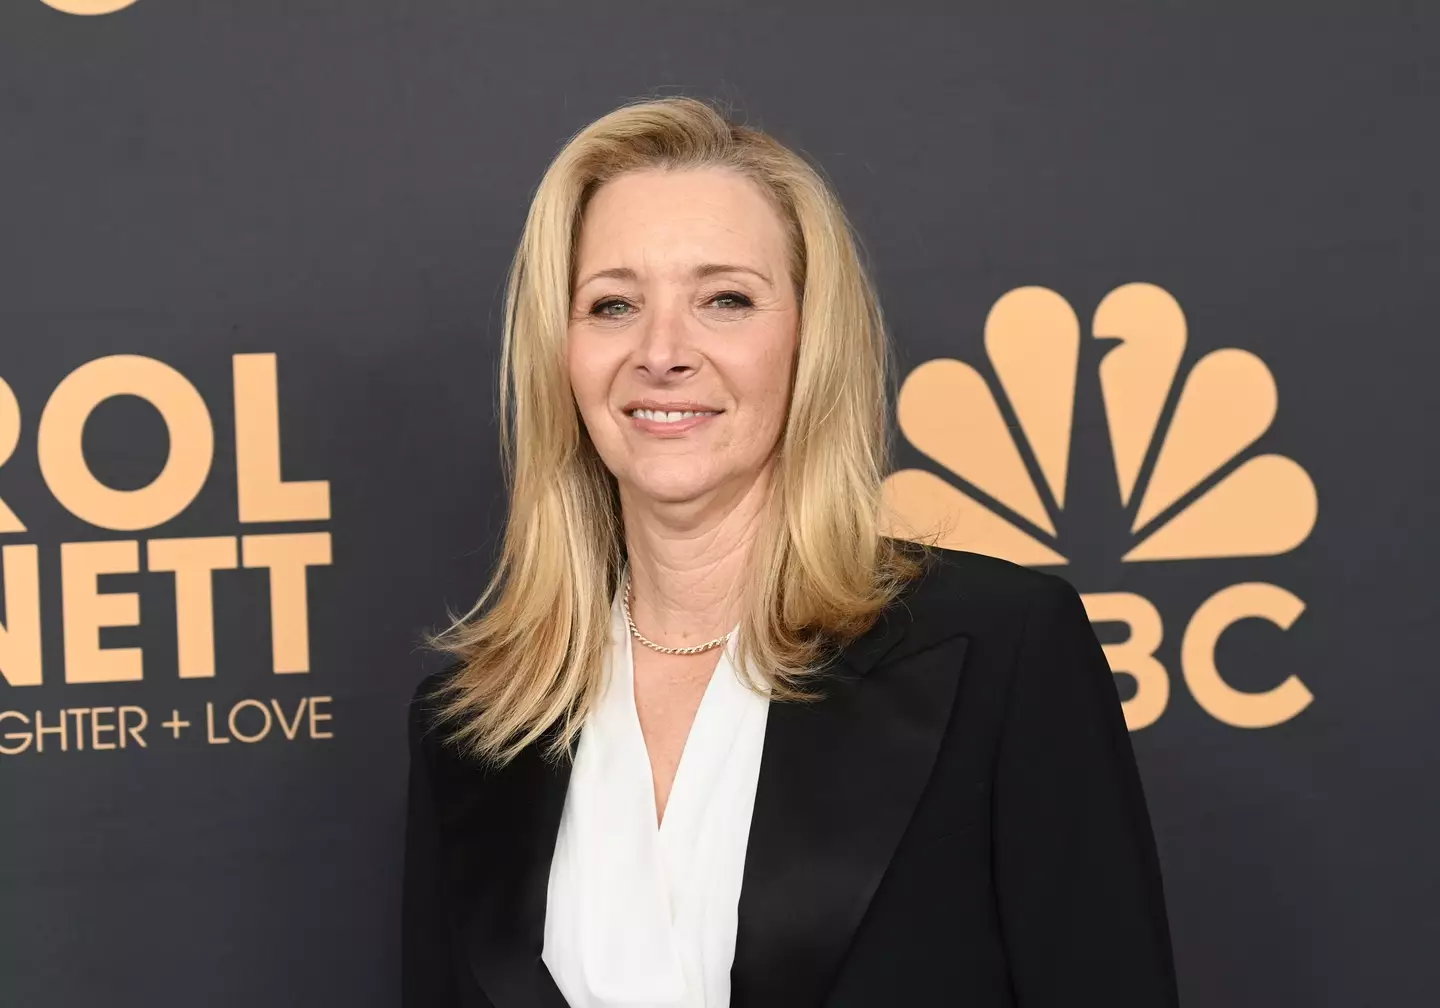 Someone made a misogynistic comment to Lisa Kudrow.